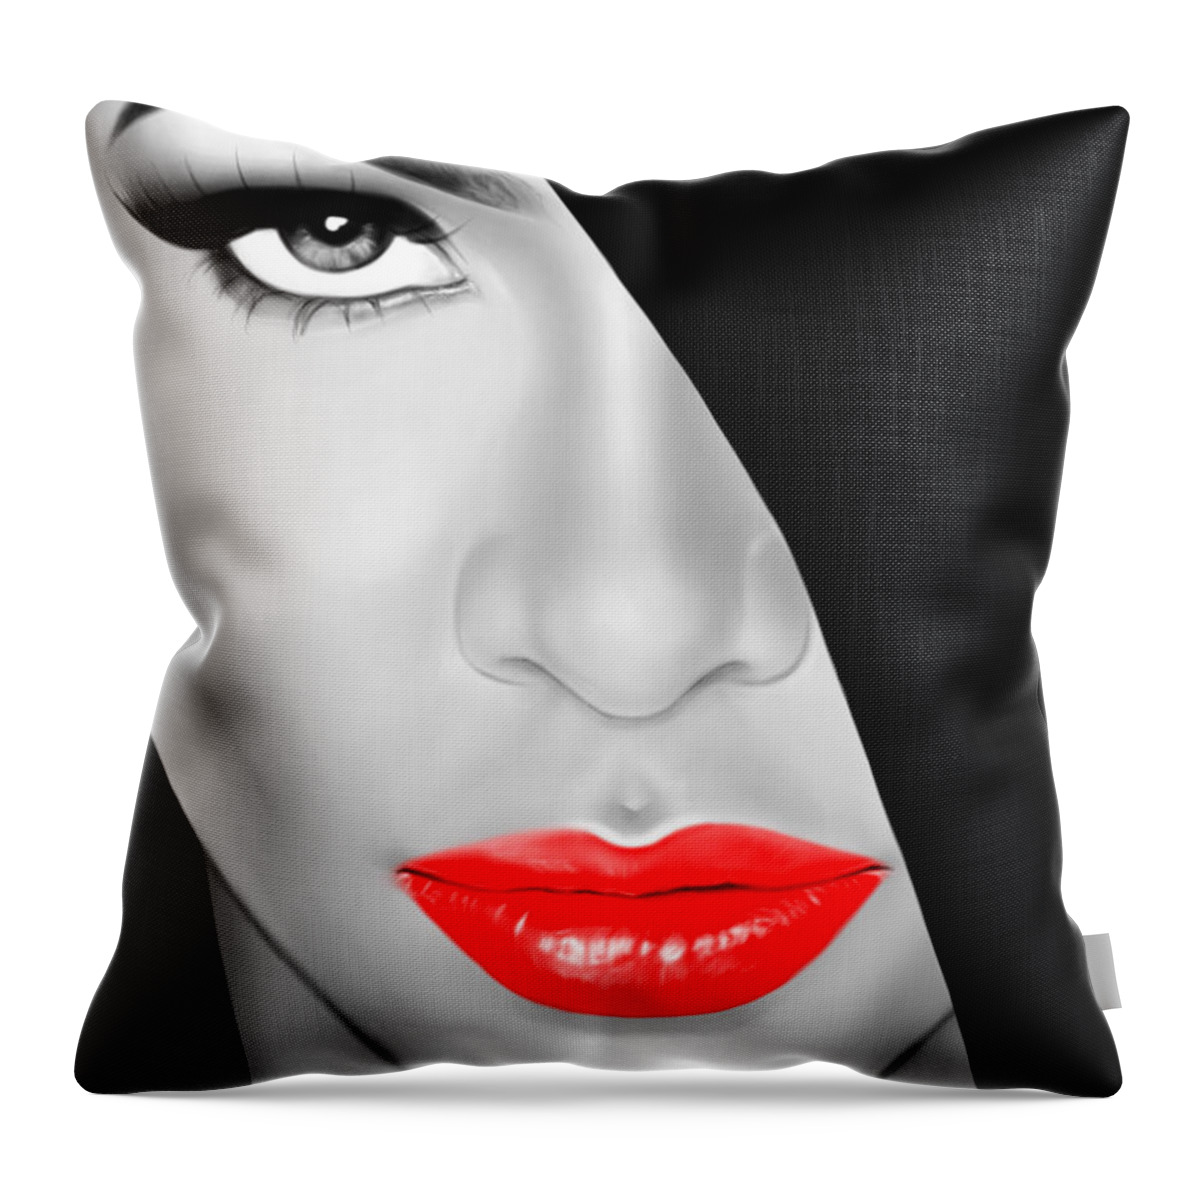 Davonte Bailey Throw Pillow featuring the digital art Aaliyah by Davonte Bailey